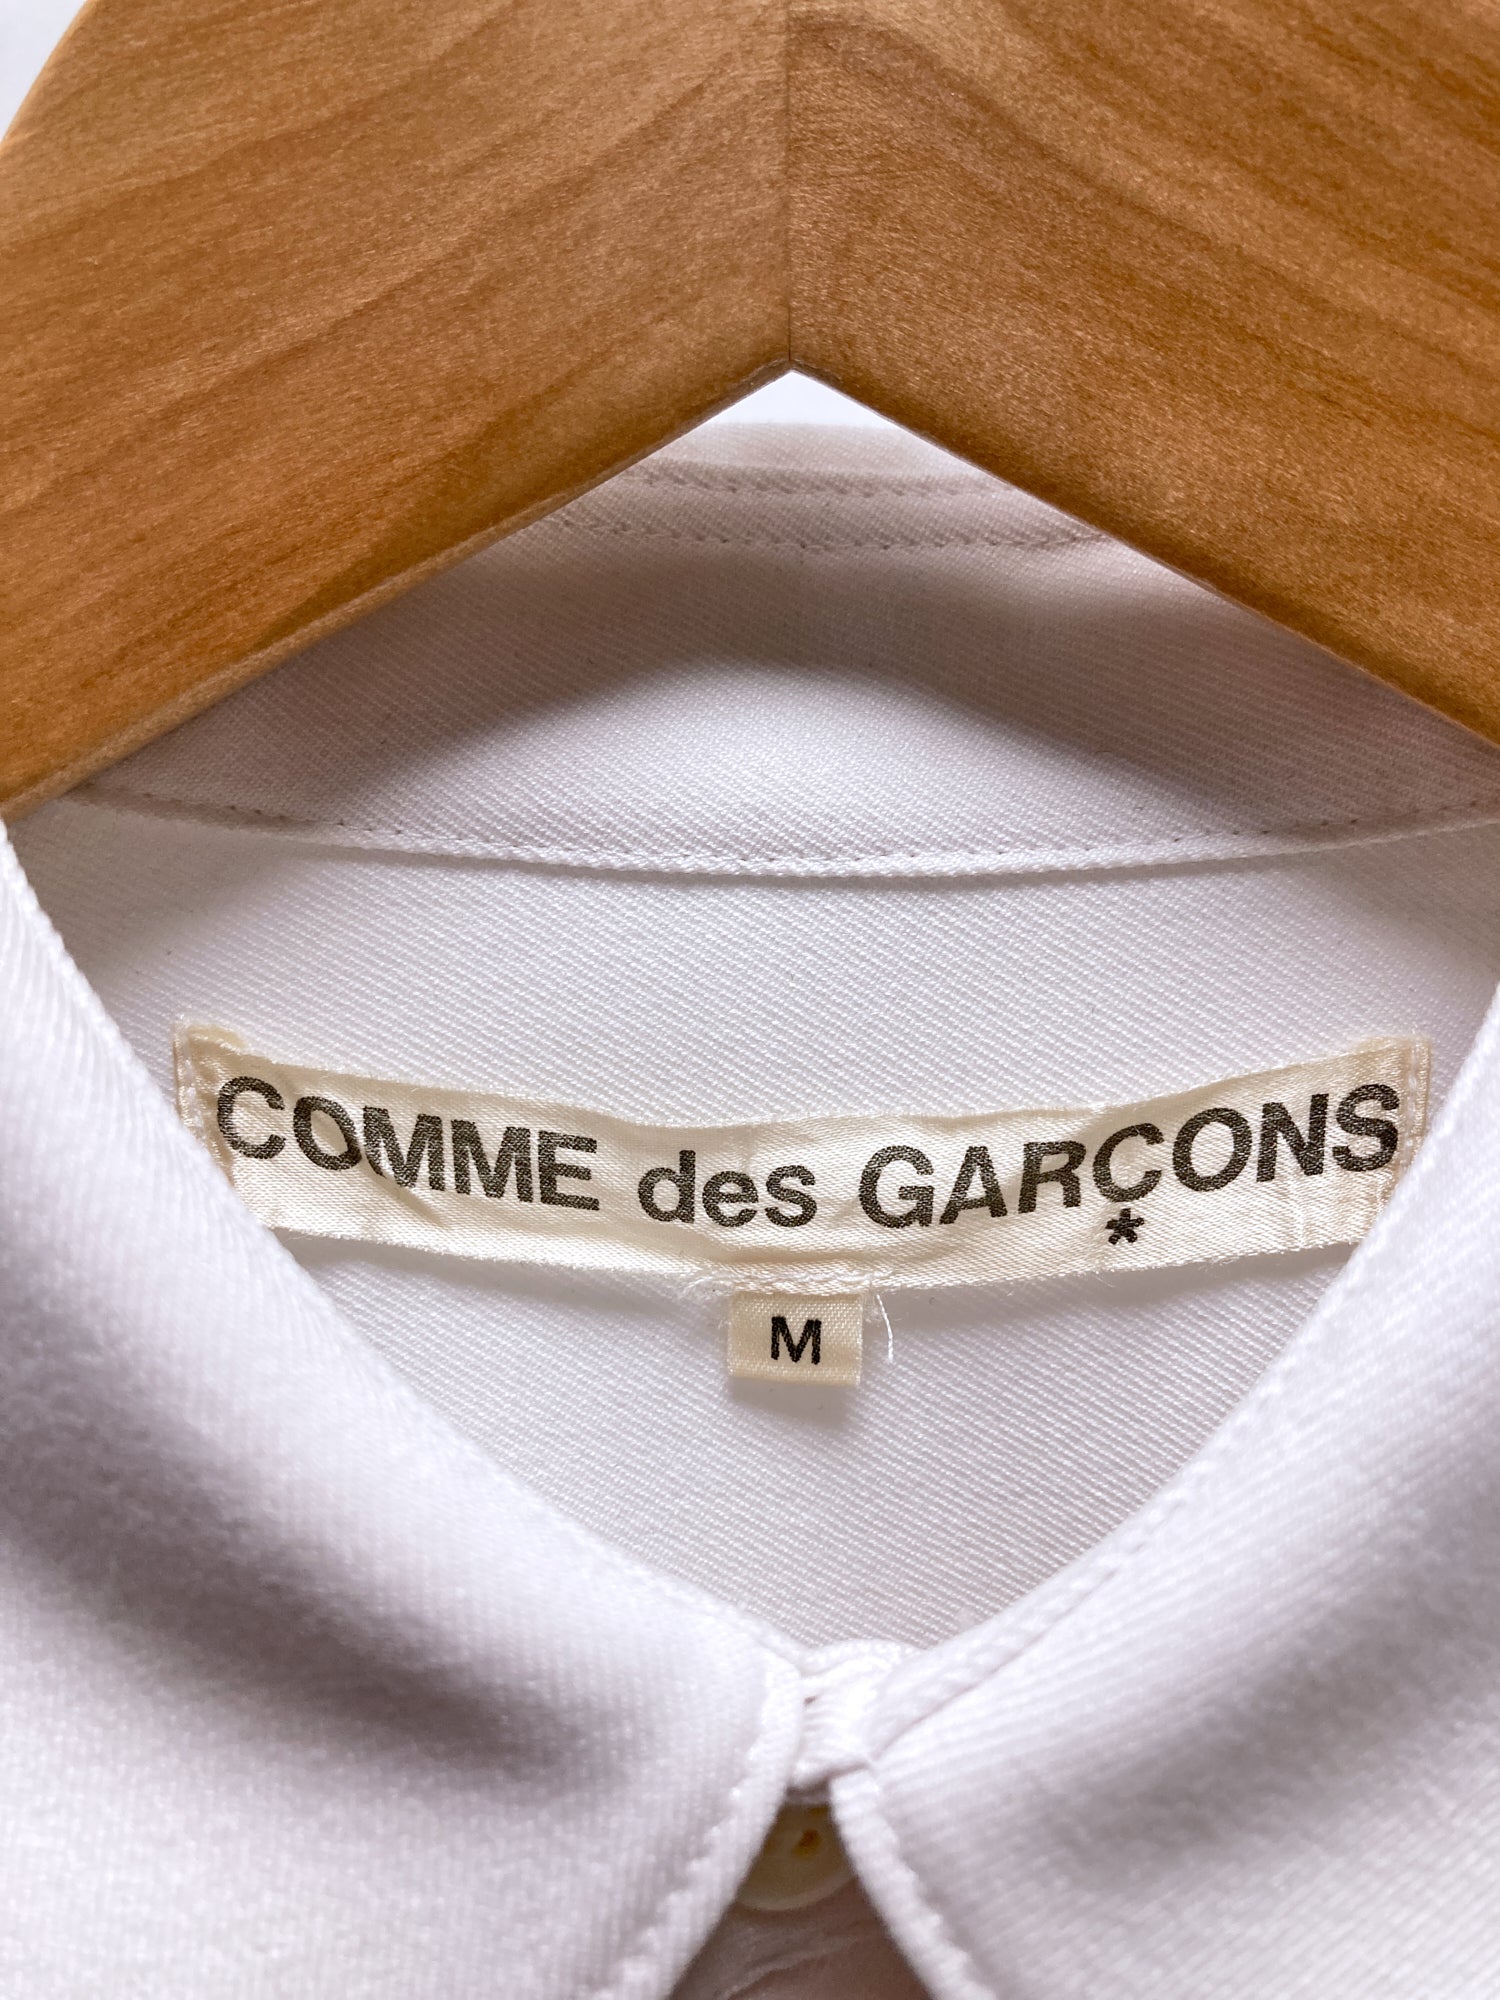 Comme des Garcons AW1995 "Sweeter than Sweet" white maxi pullover shirt dress M